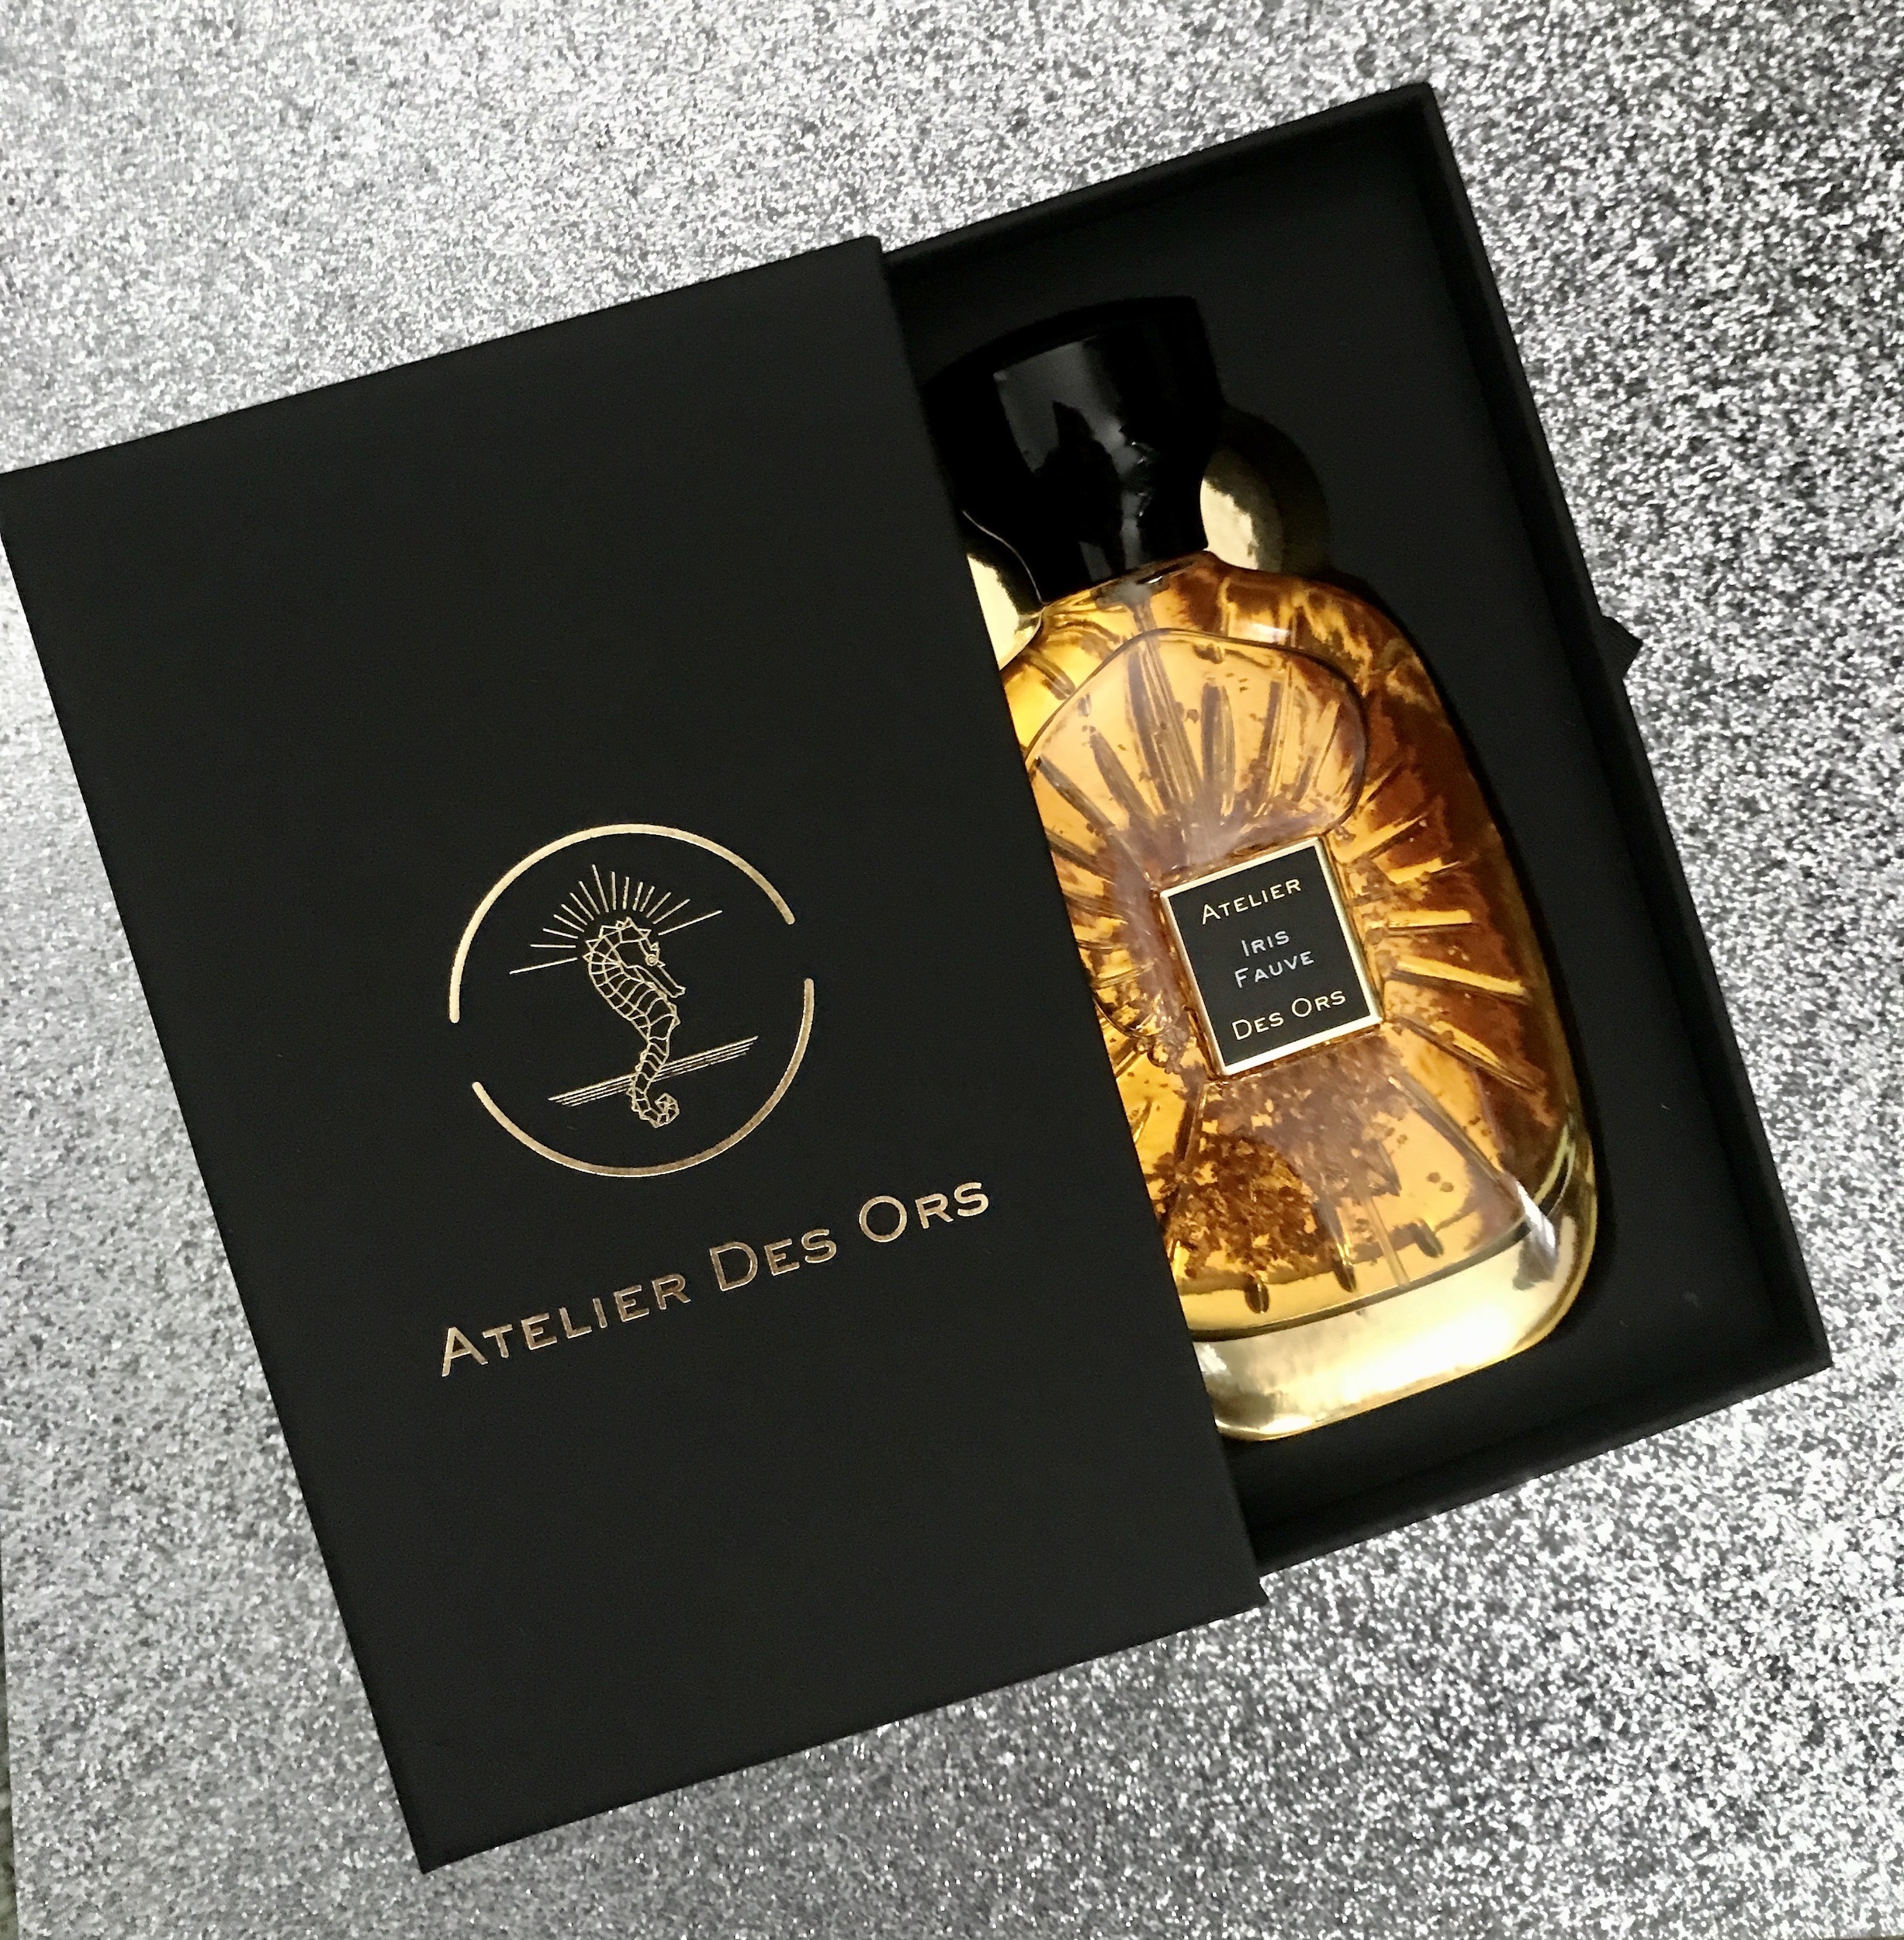 Iris Fauve Edp From Atelier Des Ors Never Say Die Beauty